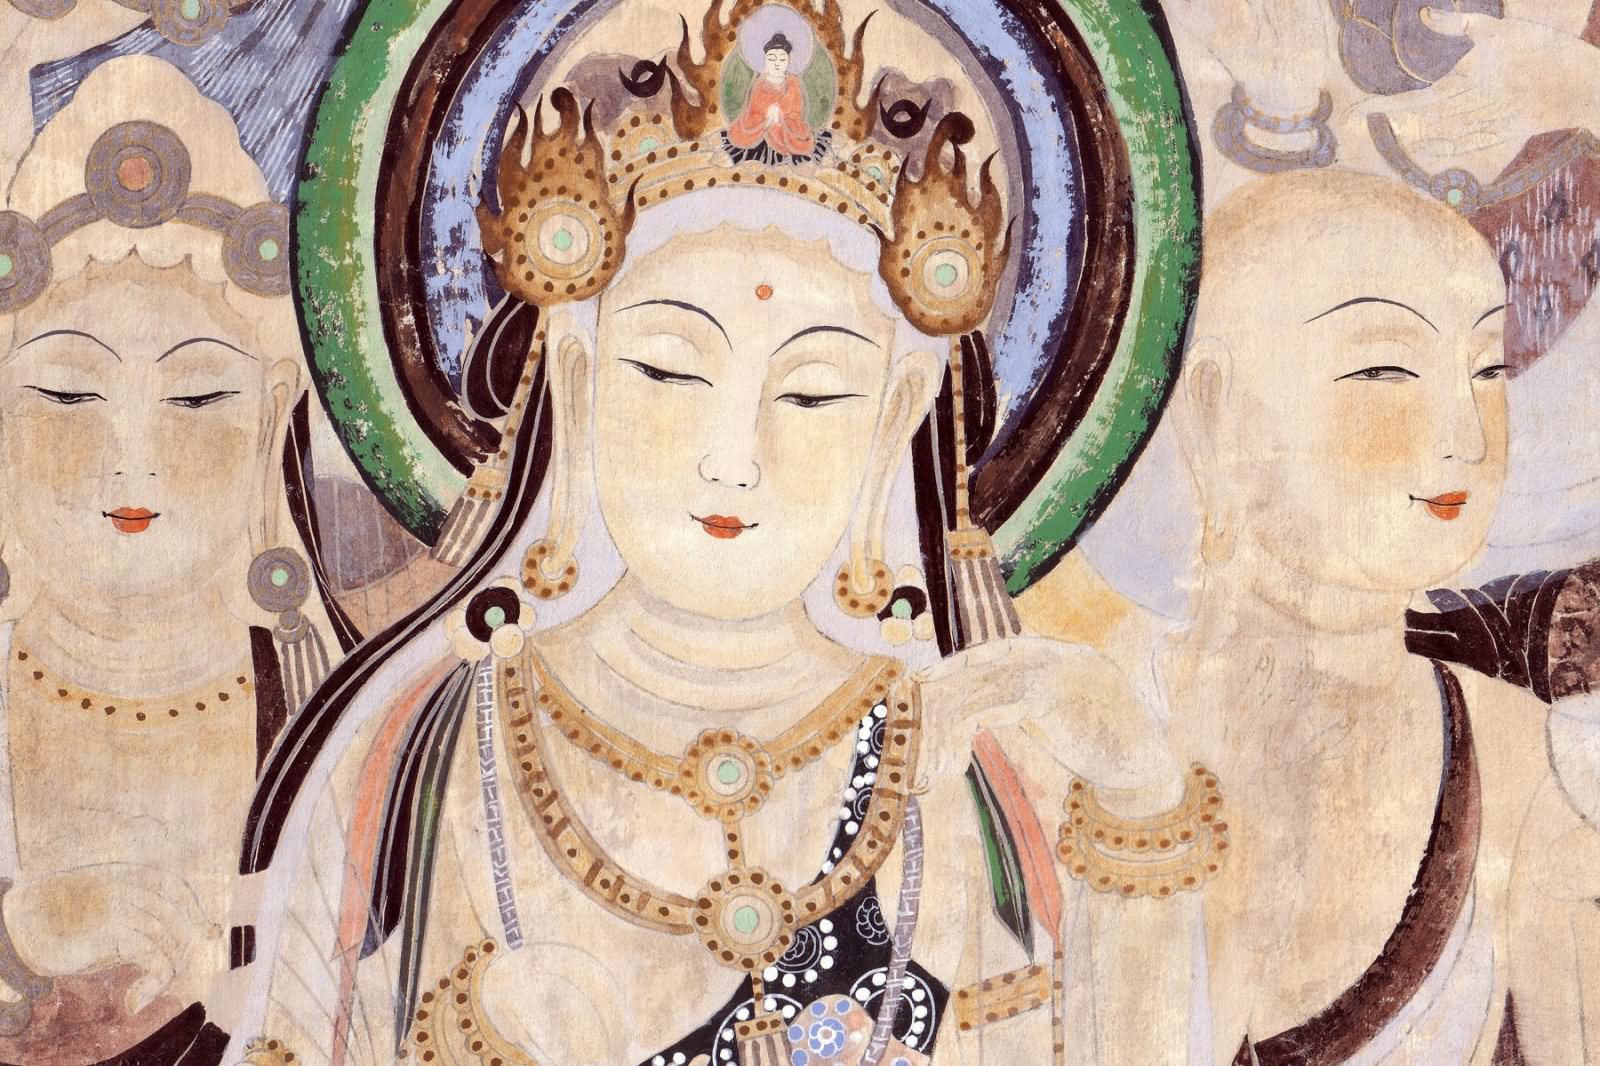 30 Most Beautiful Paintings Inside The Mogao Caves In Dunhuang, China